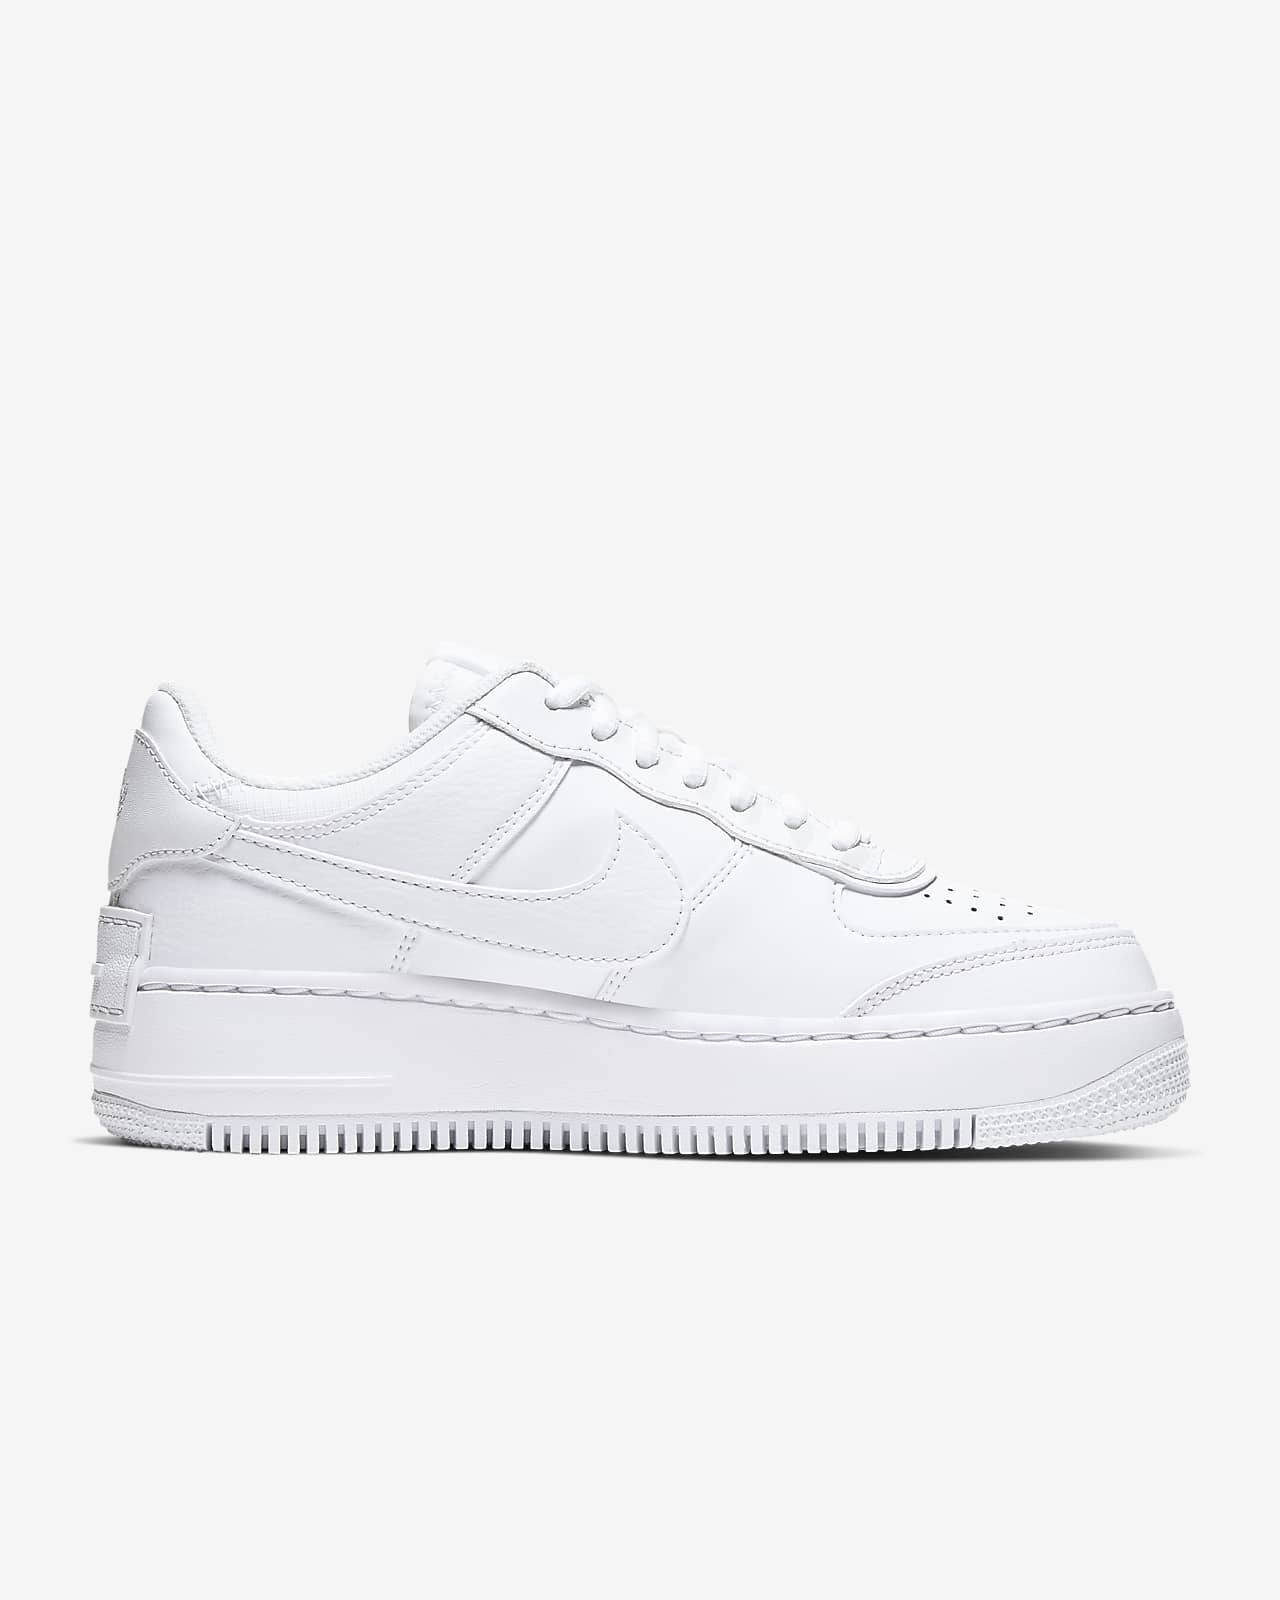 cheapest place to get air force 1